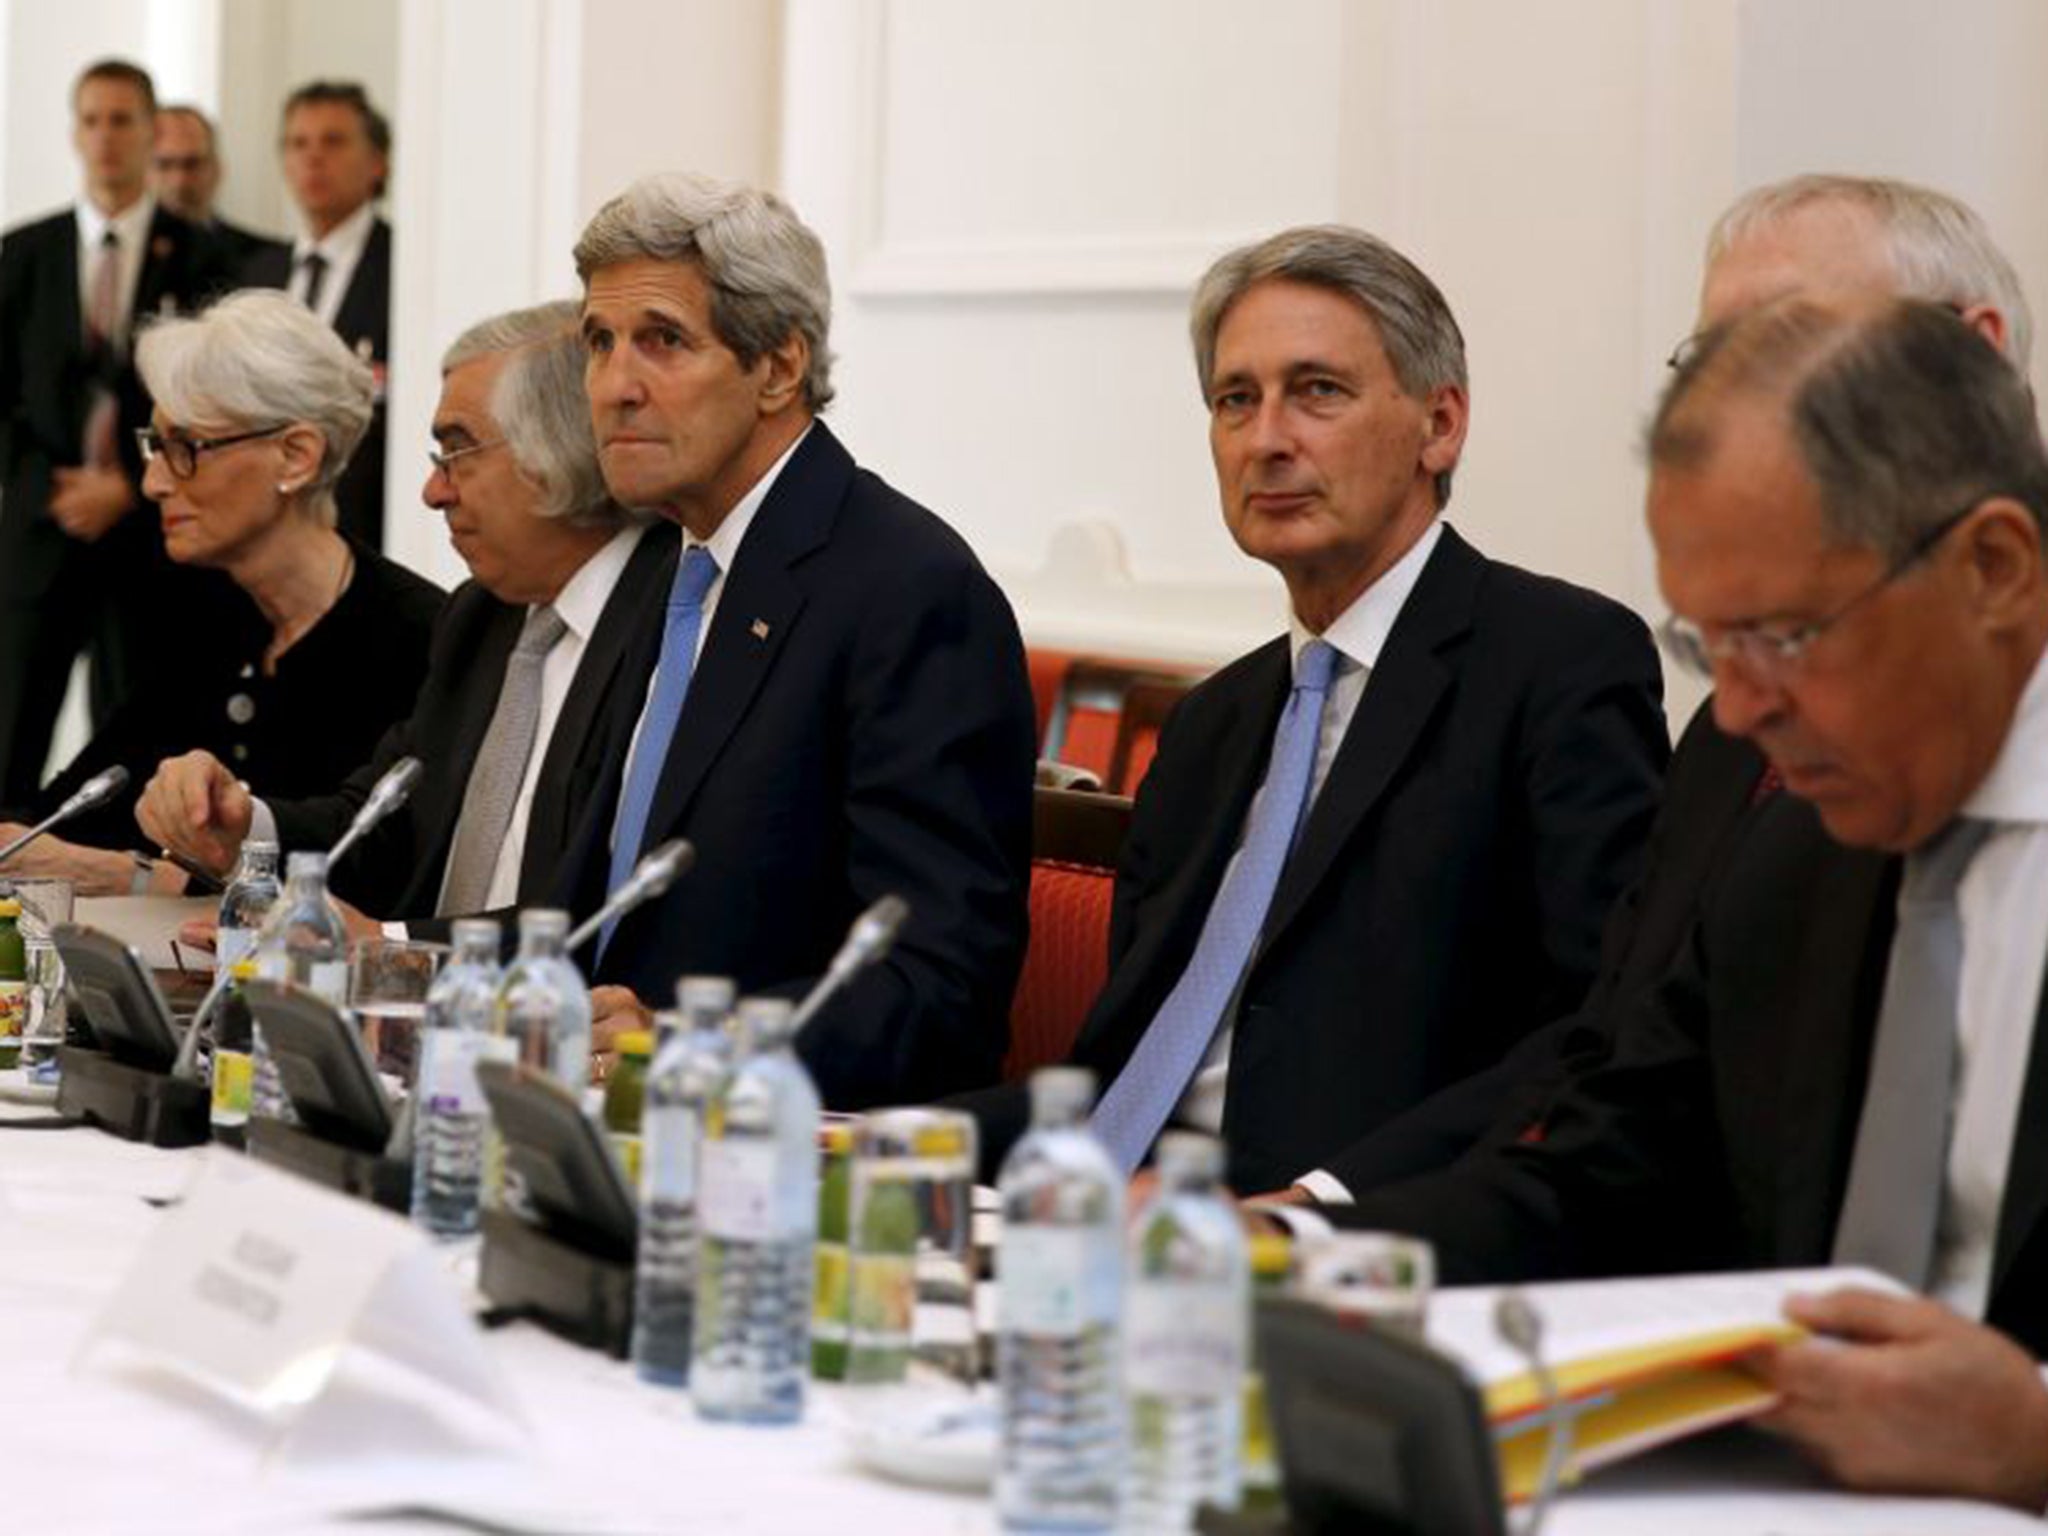 US Secretary of State John Kerry and UK Foreign Secretary Philip Hammond meet foreign ministers in Vienna on Monday